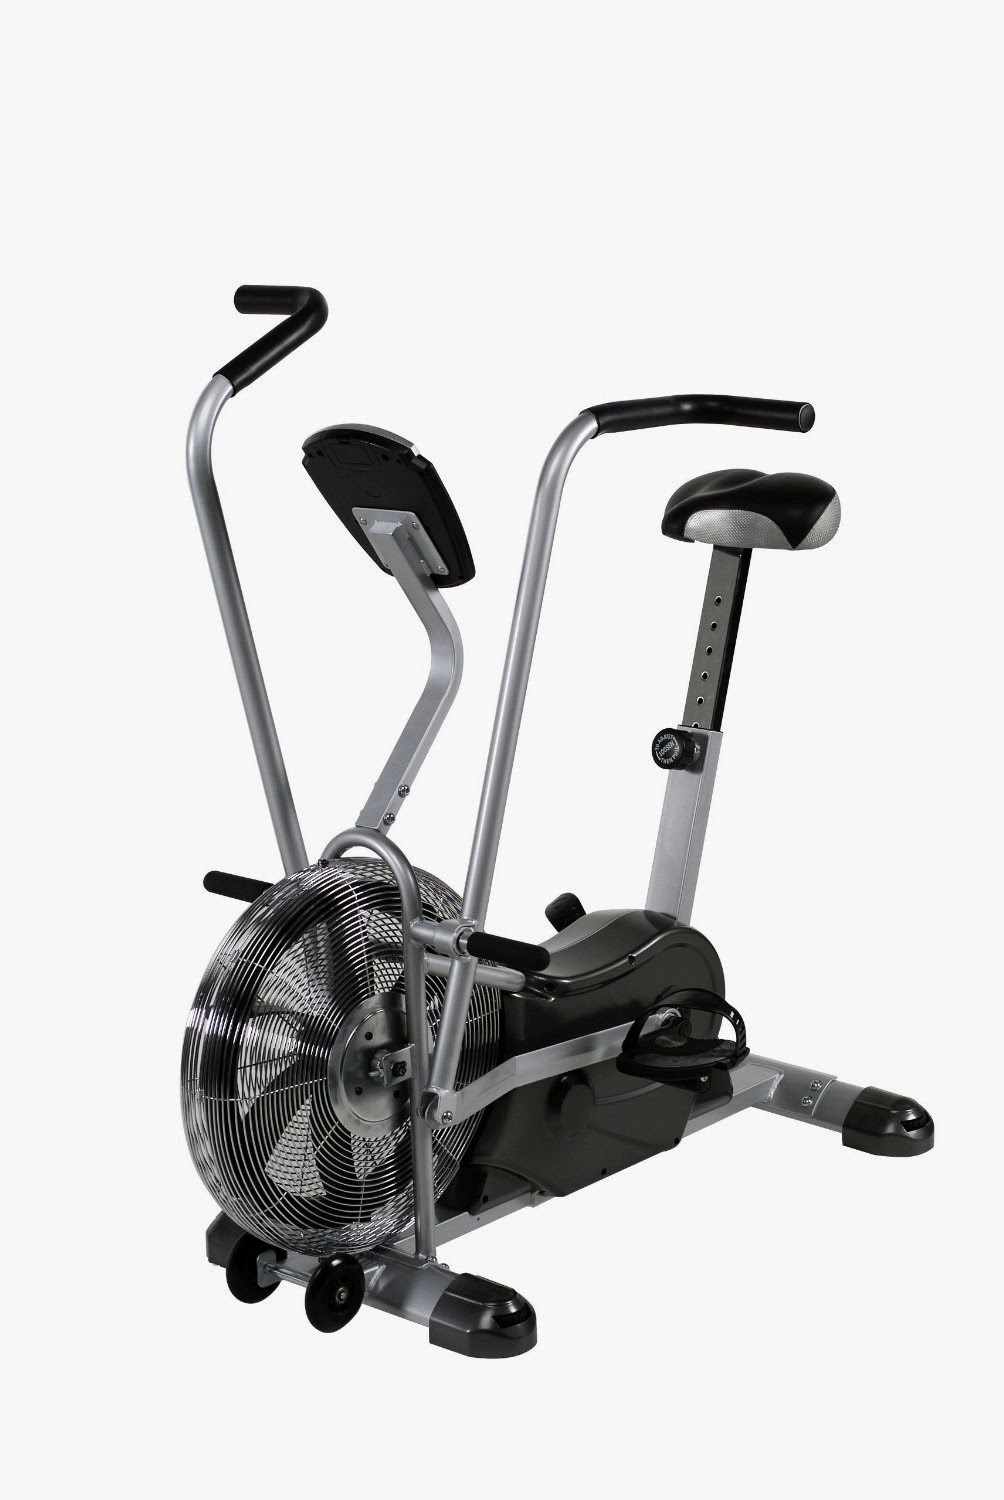 Marcy Air 1 Fan Exercise Bike, review of features, air resistance for infinite levels, work arms & legs